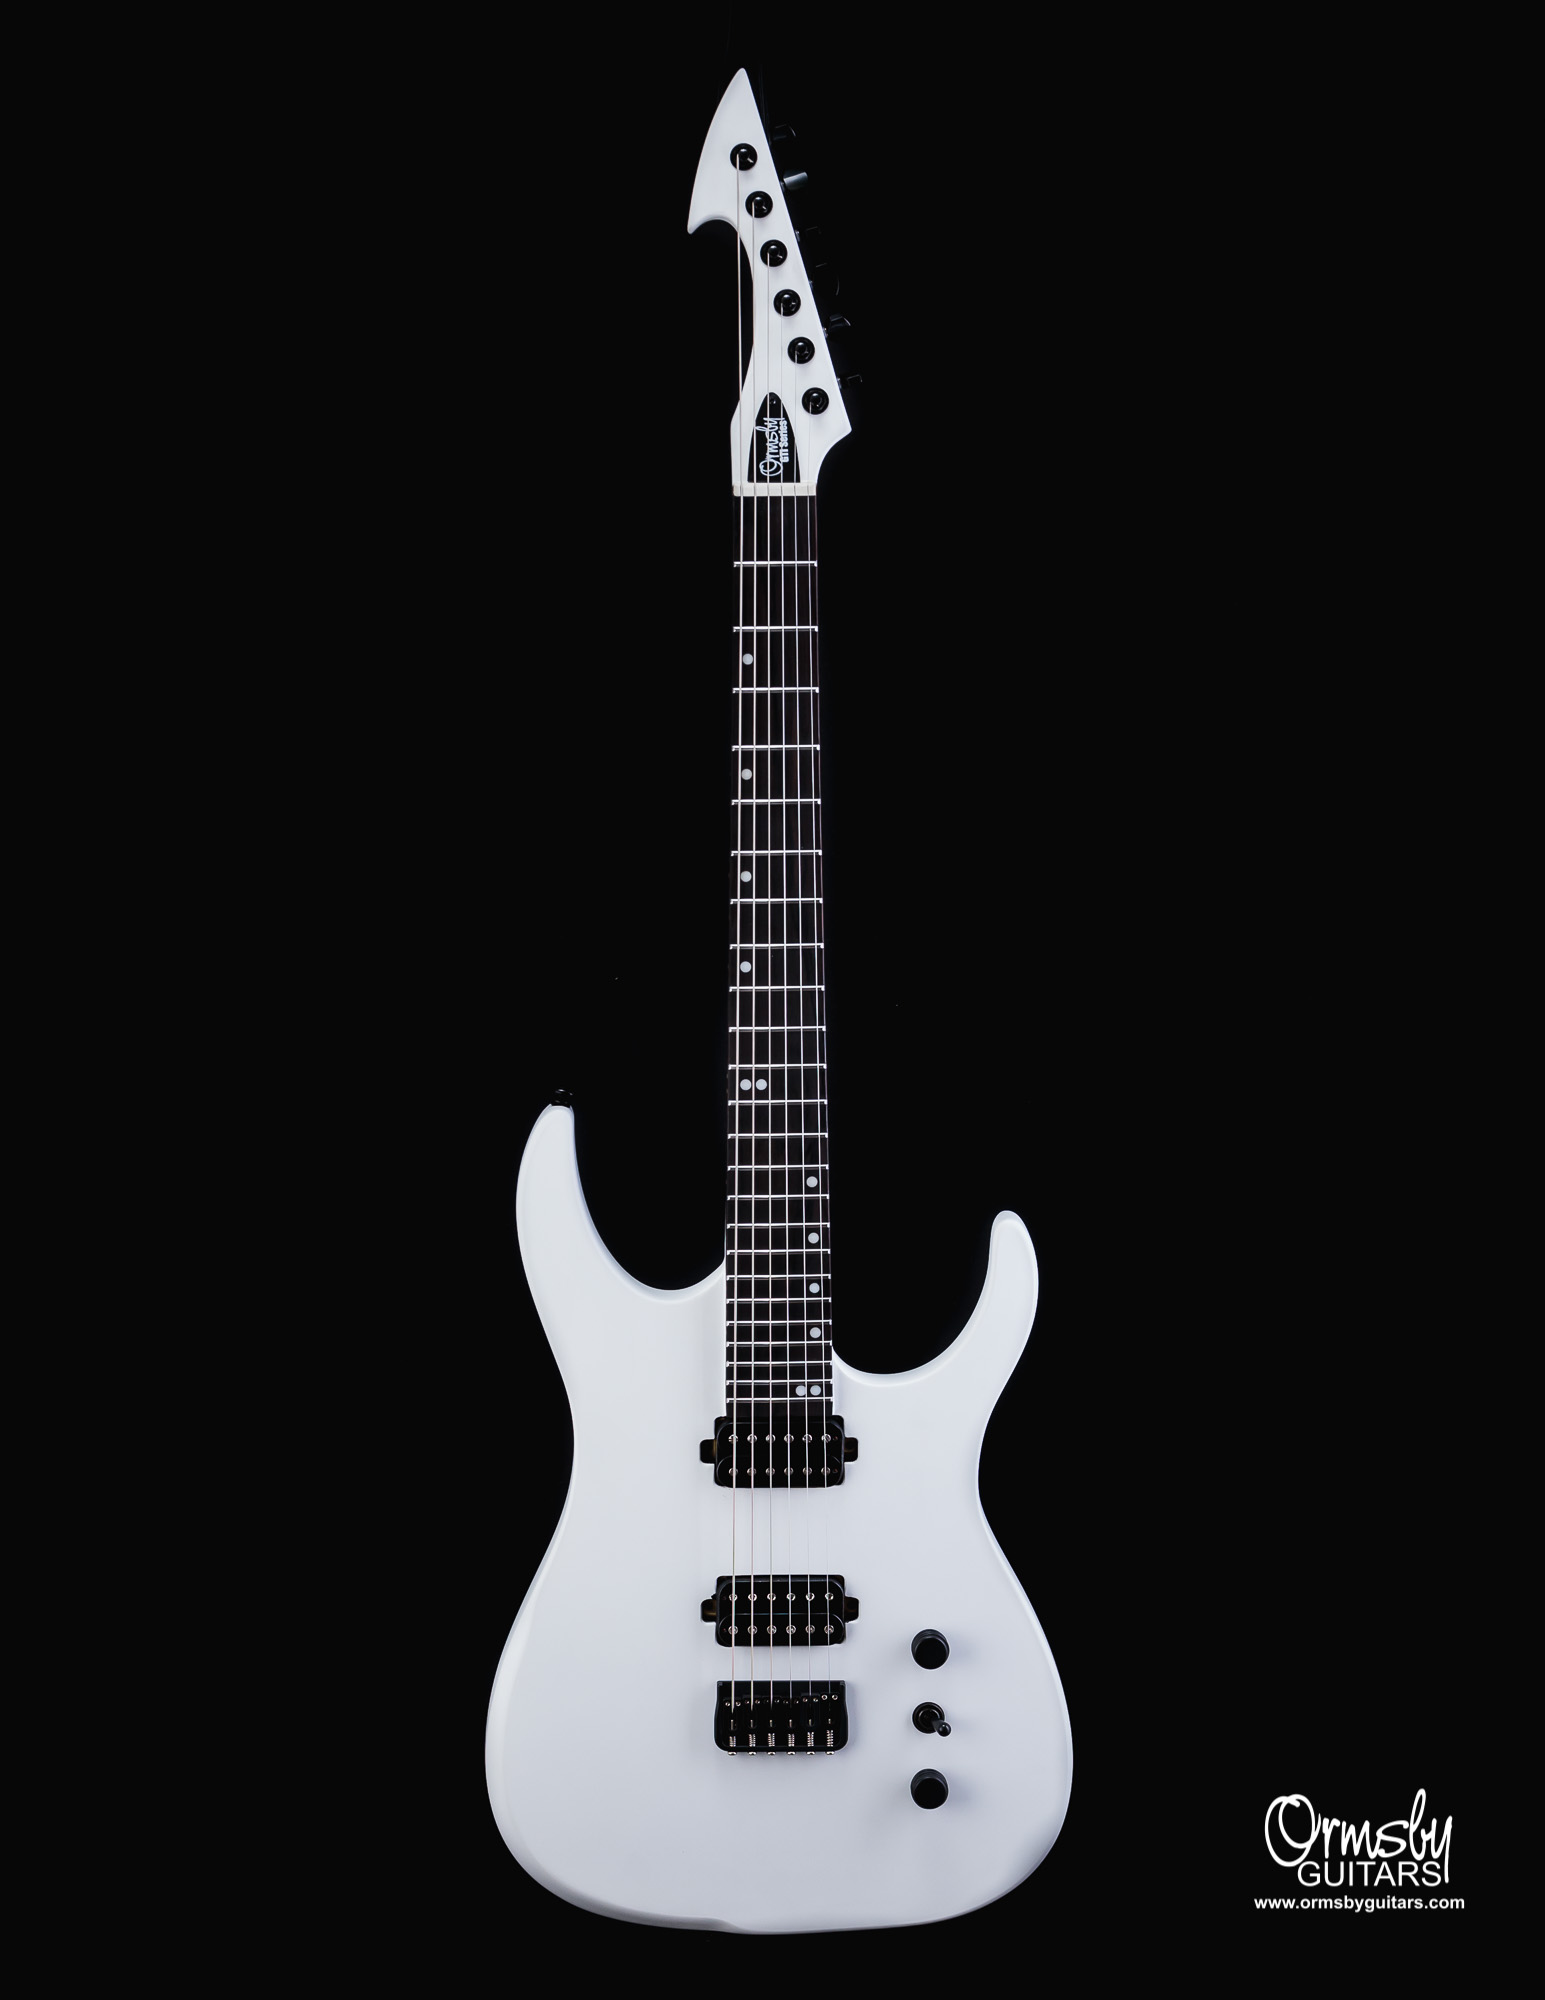 Ormsby Guitars Hype Gti standard scale